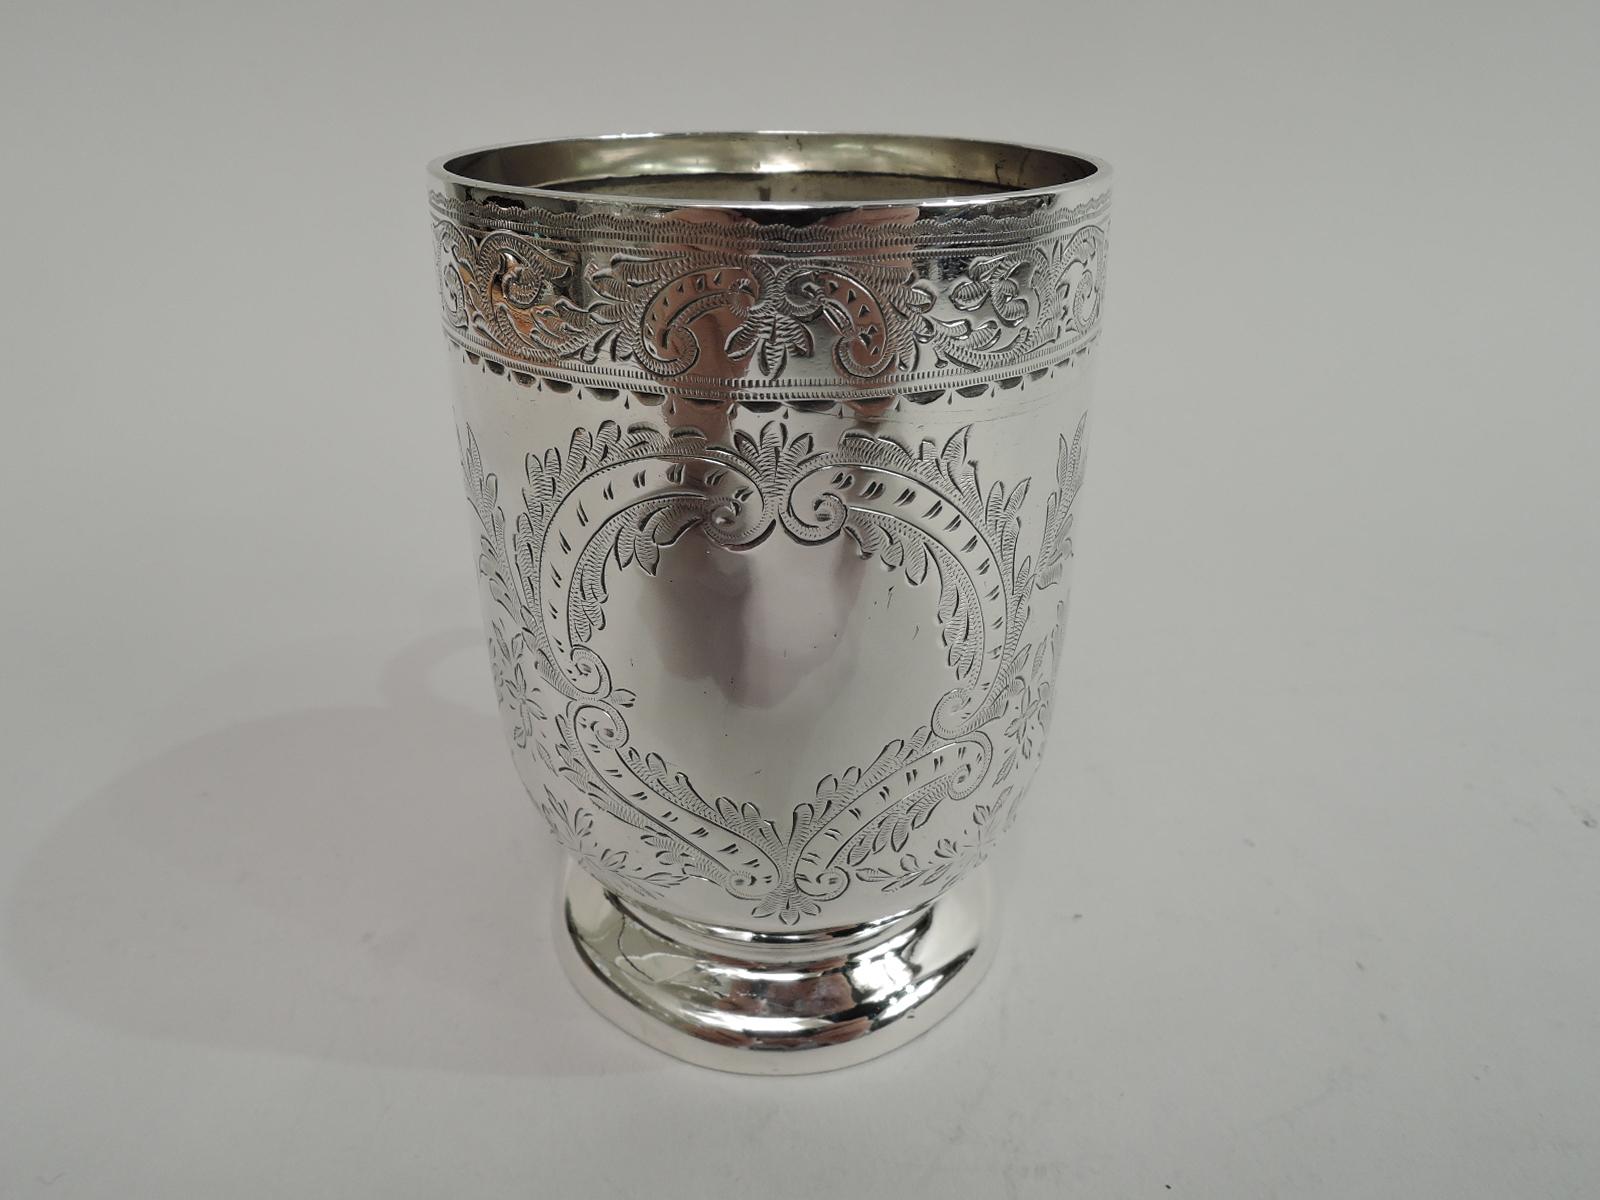 Pretty Victorian sterling silver baby cup. Made by John Thomas Heath & John Hartshorne Middleton in Birmingham in 1898. Tall bowl with curved bottom, c-scroll handle, and raised foot. Engraved leafing scrollwork and asymmetrical scrolled frame